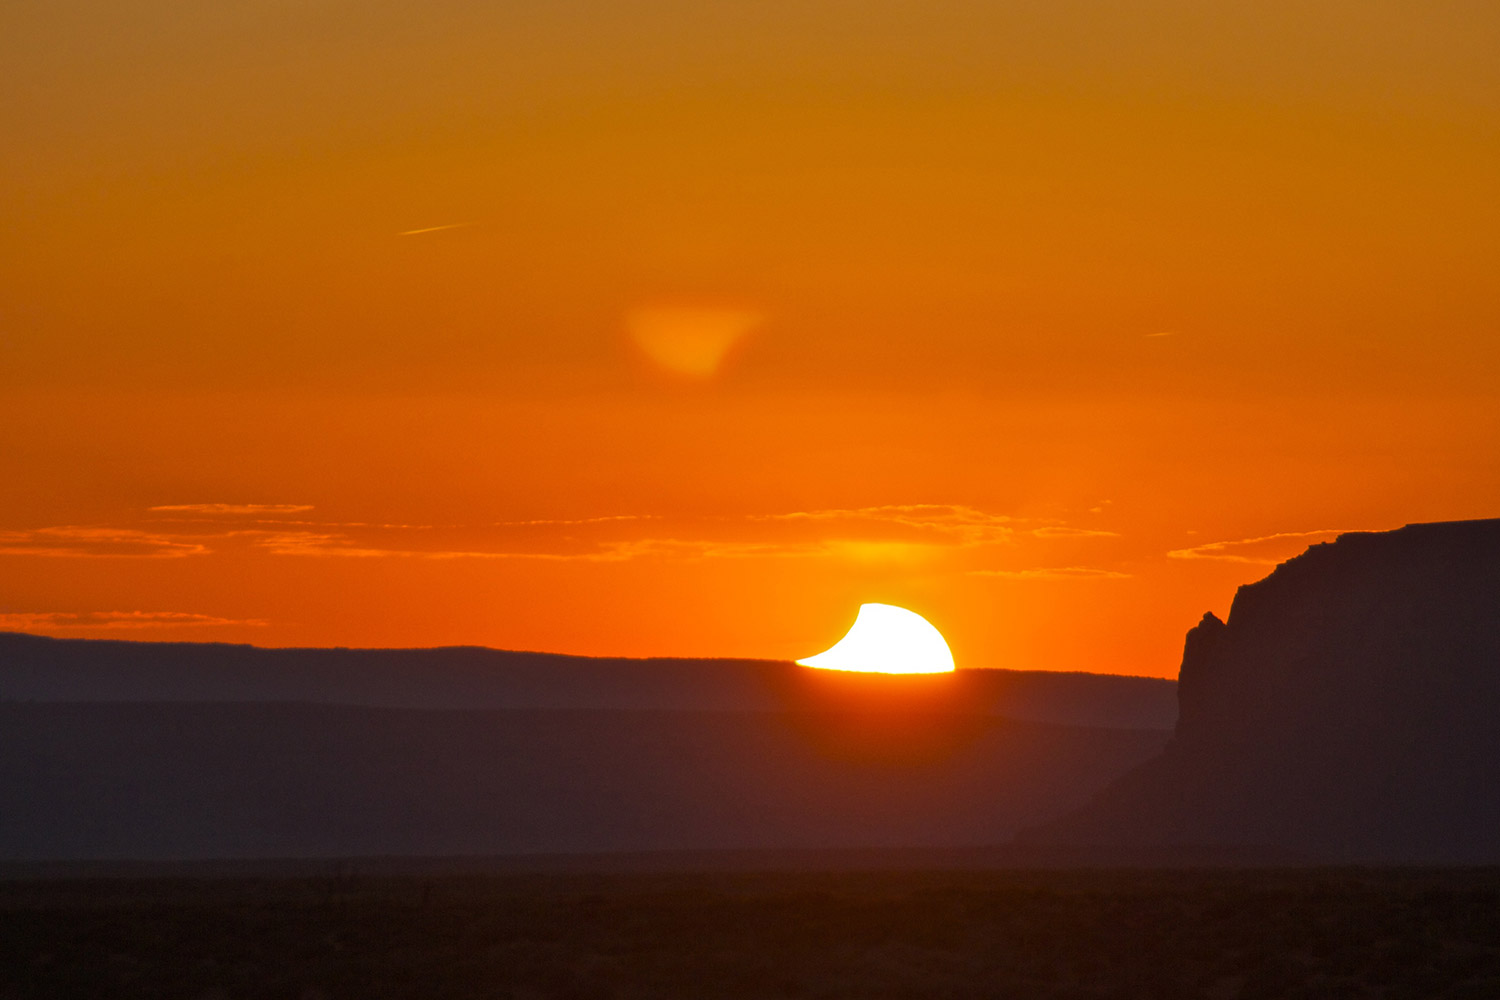 An eclipse of the Sun at sunset over Monument Valley, Utah shows the Moon gradually moving off revealing the surface of the Sun. Credit: Mike Barrett